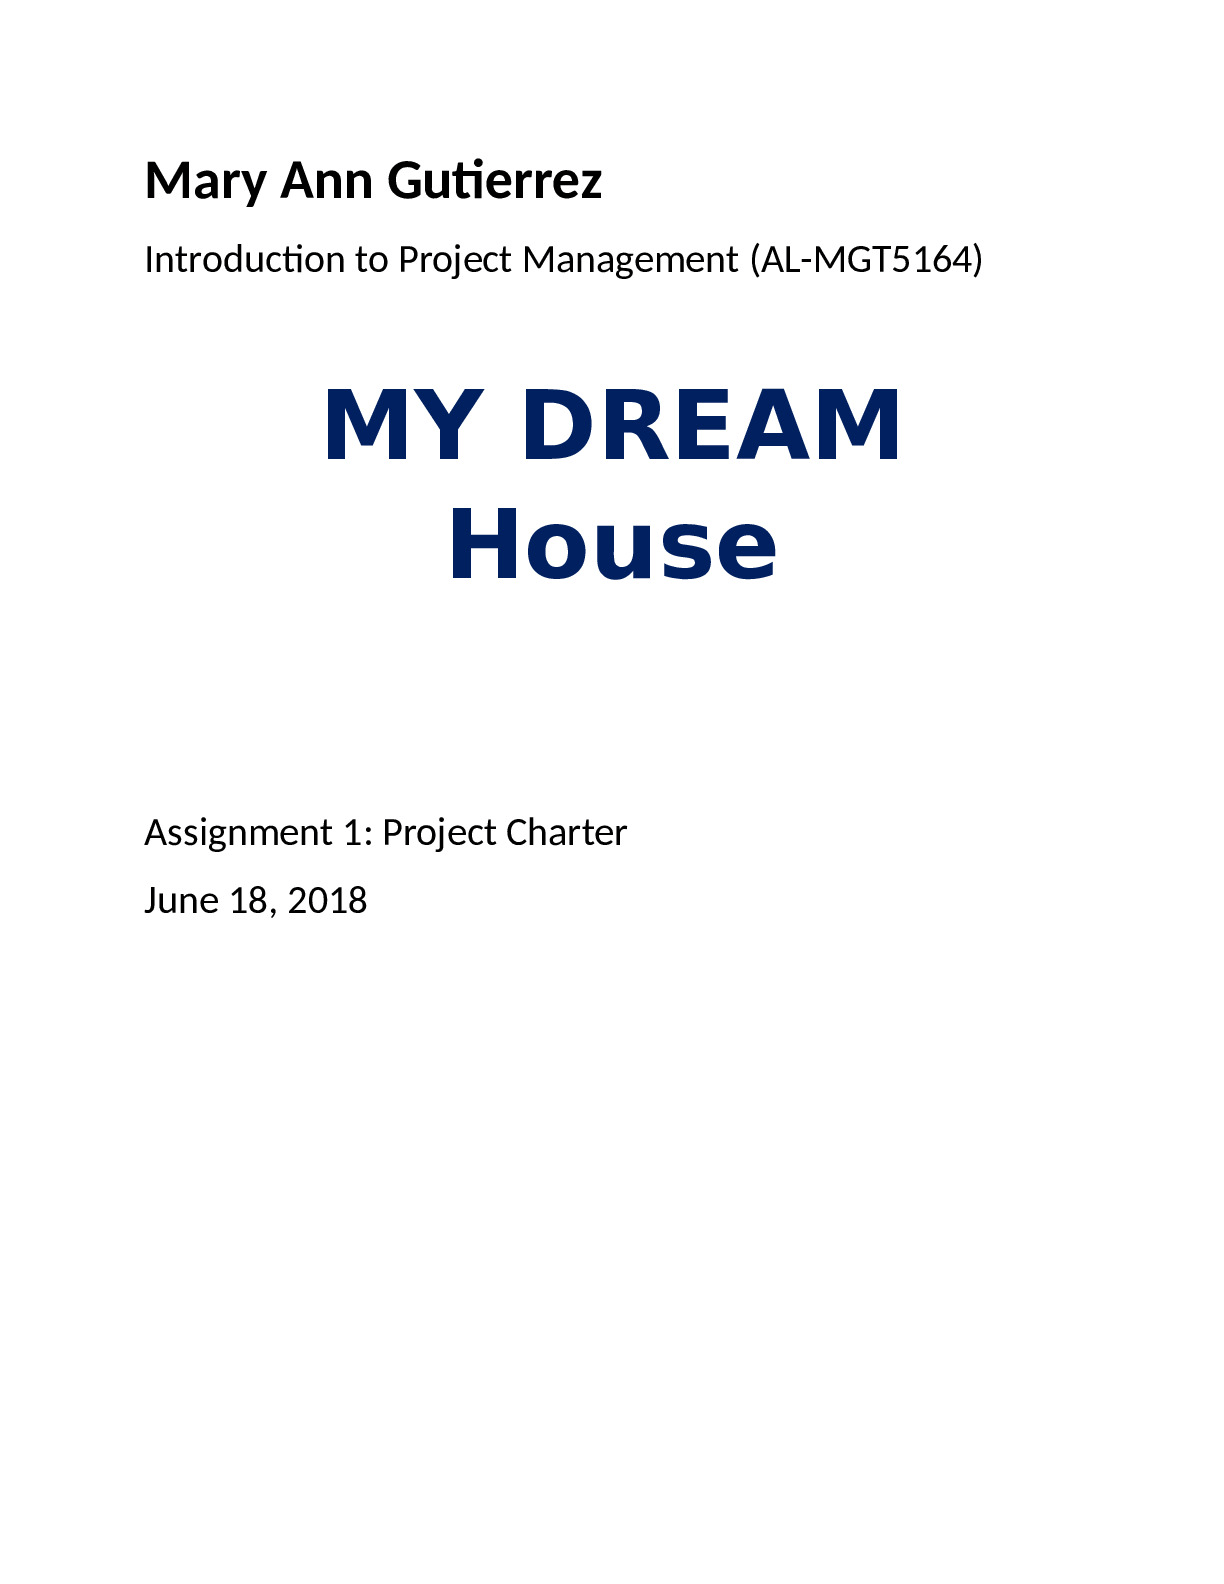 Assignment_1_Project_Charter.docx